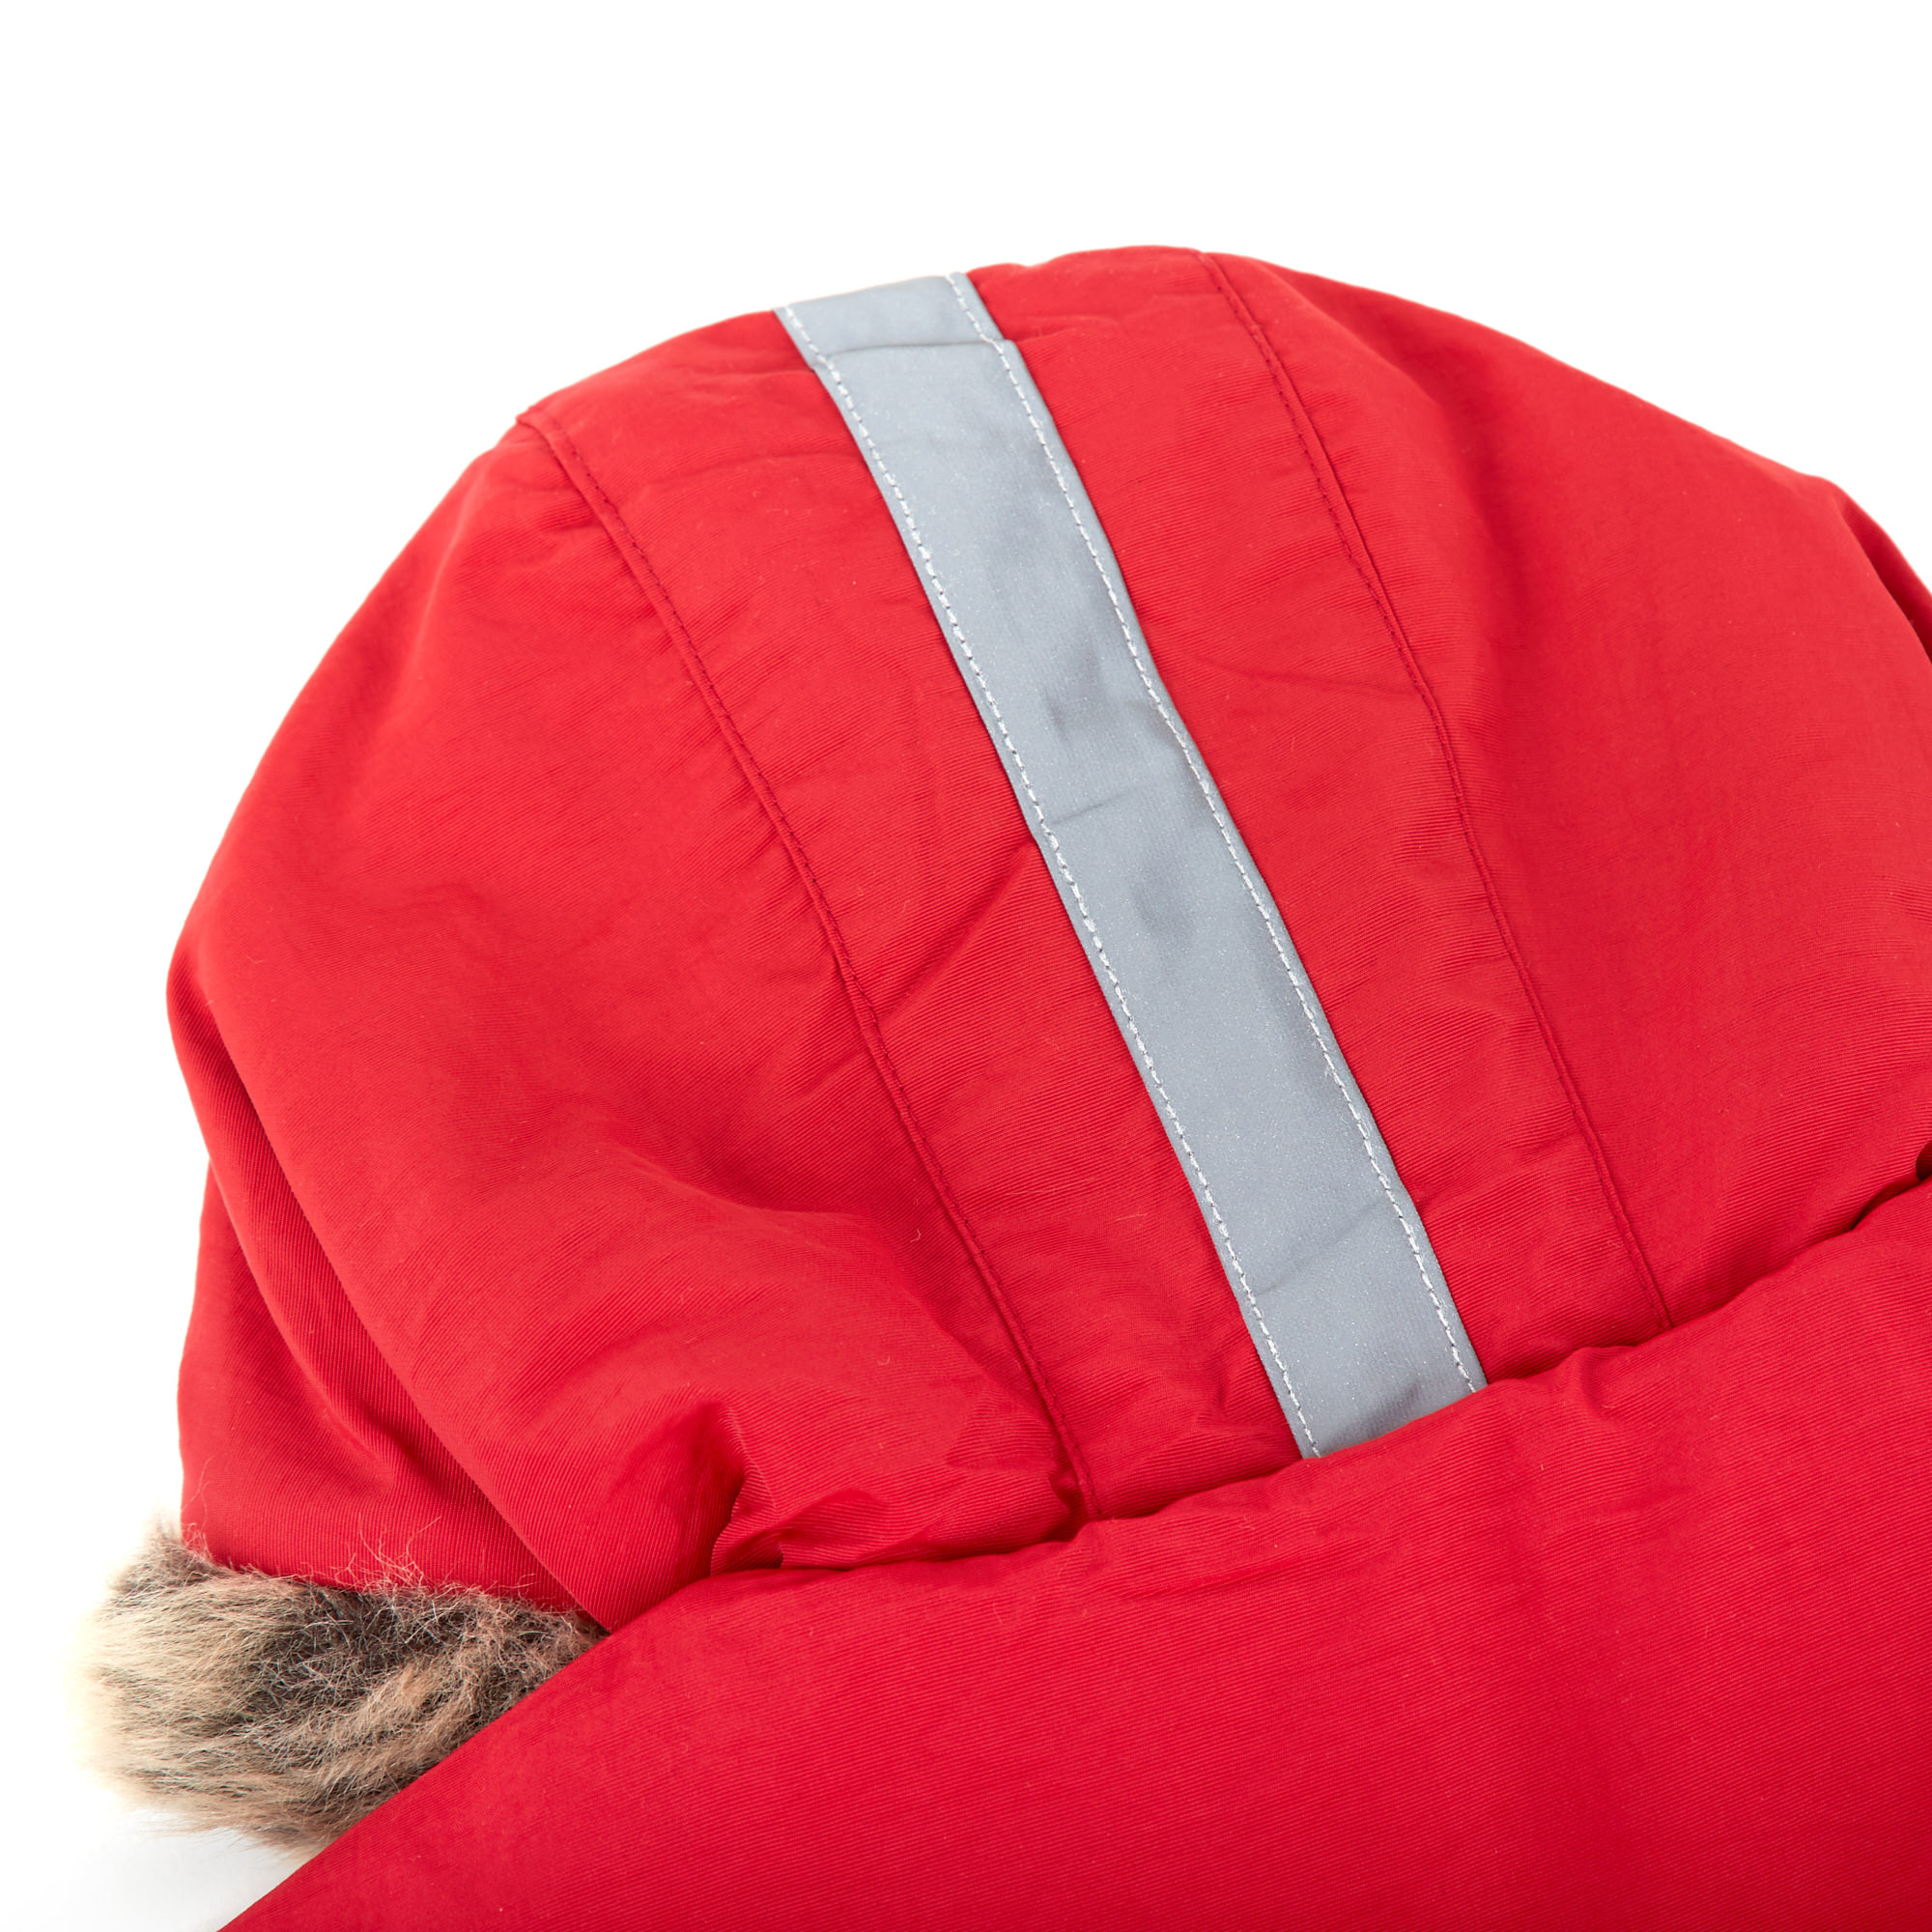 Insulated hooded winter jacket, red, for babies and toddlers